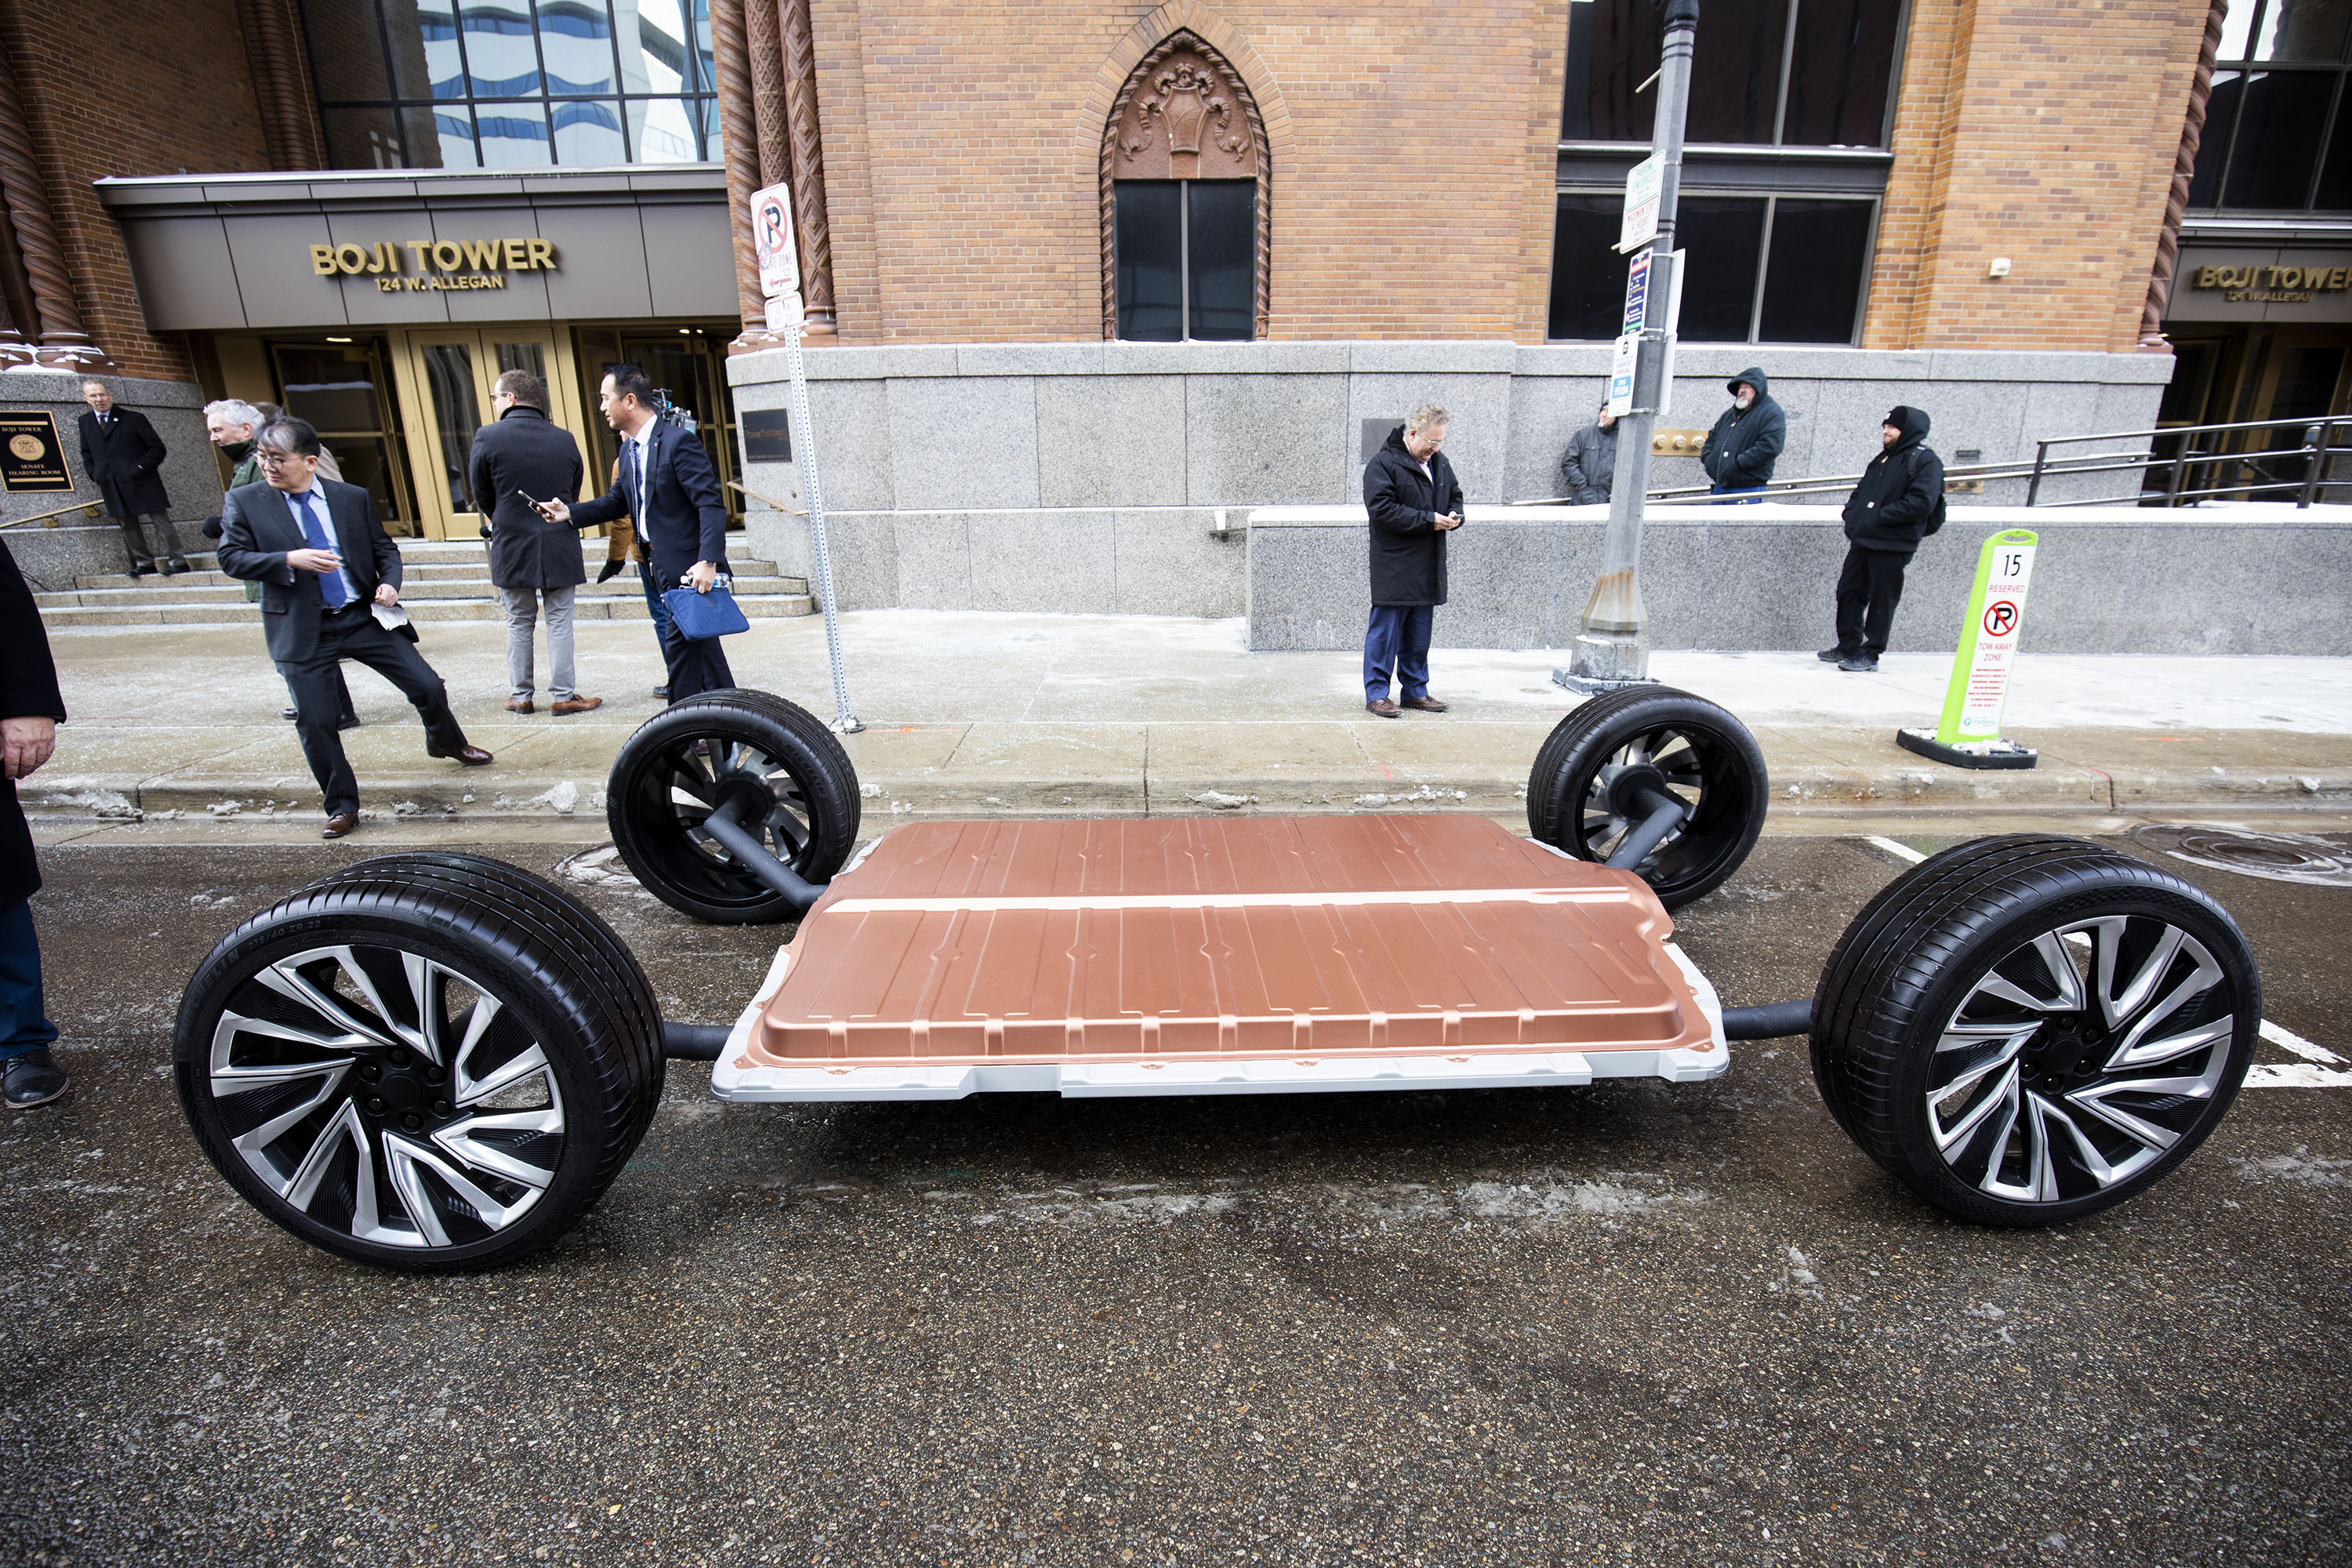 The chassis of an electric vehicle, which consists of a large rectangular battery connected to four wheels, sits on a road in front of a building.